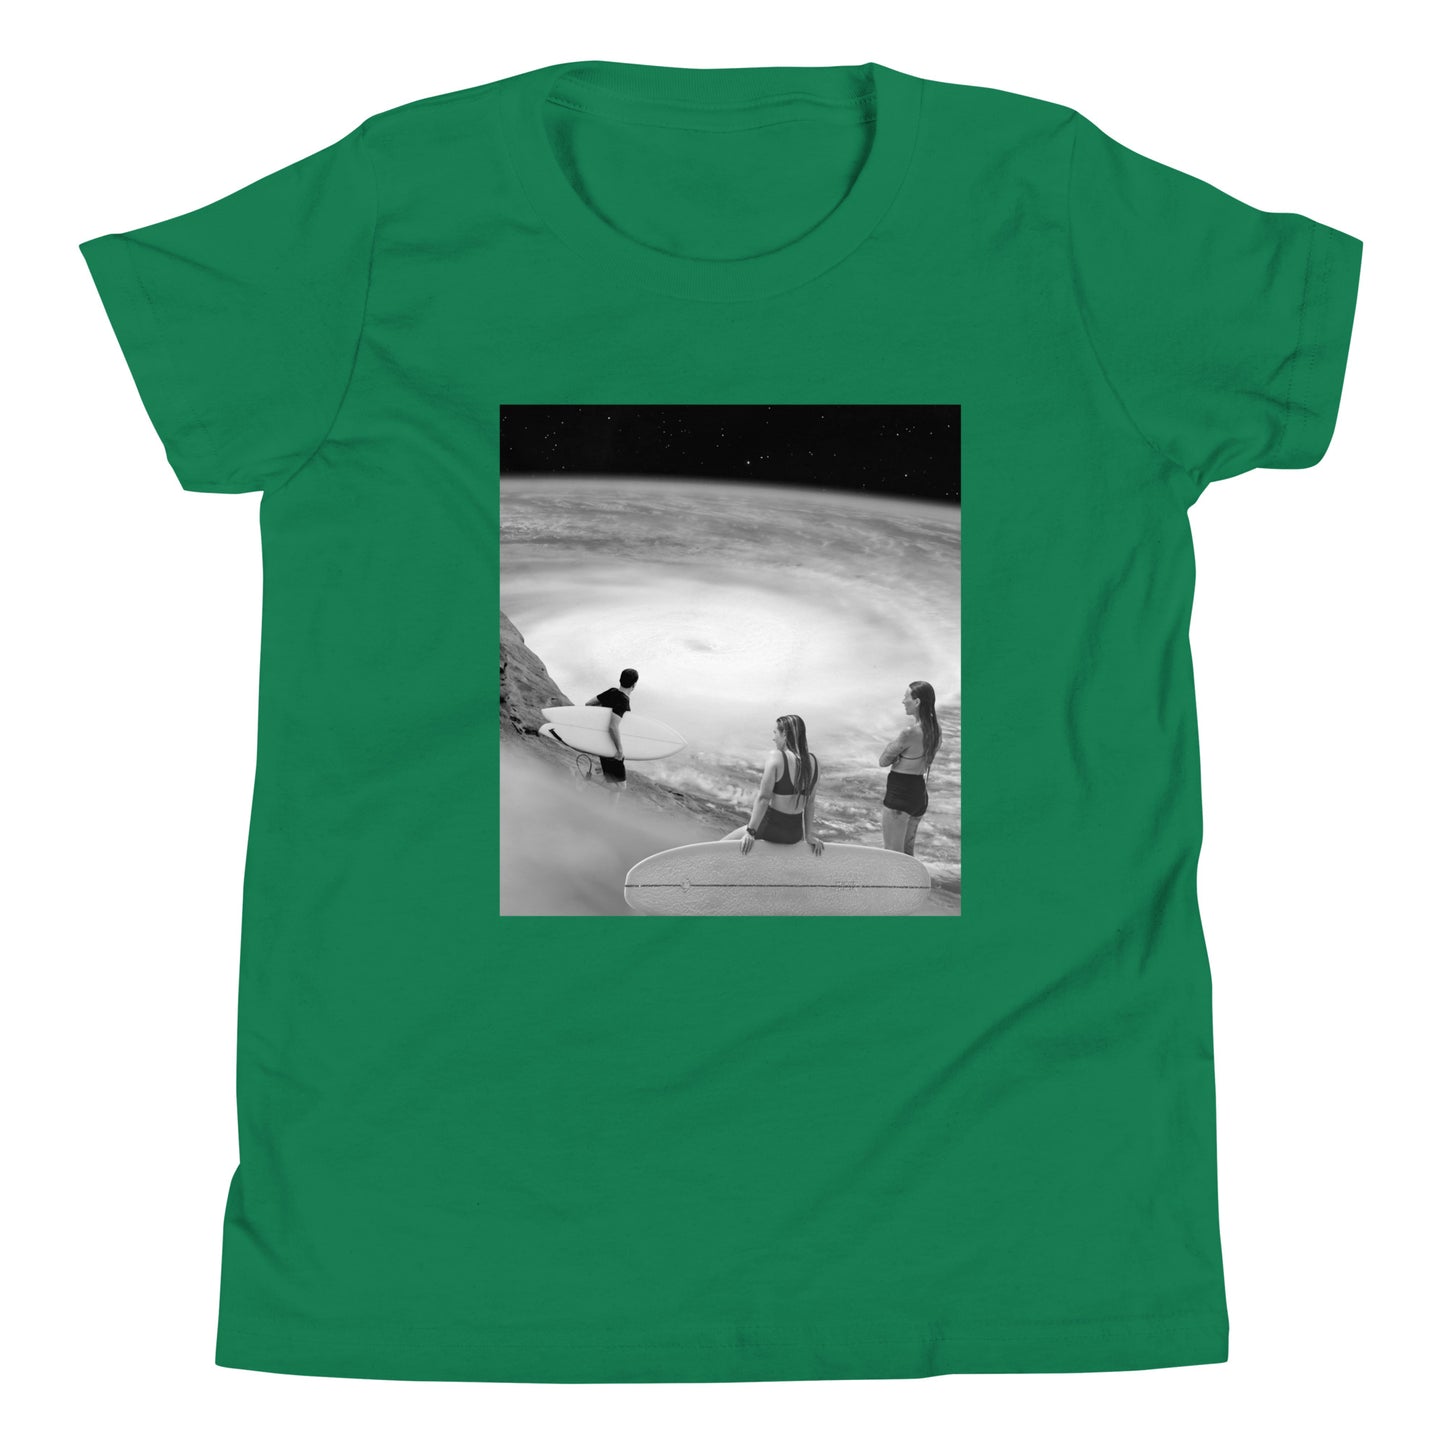 Surf's Up Kid's Youth Tee